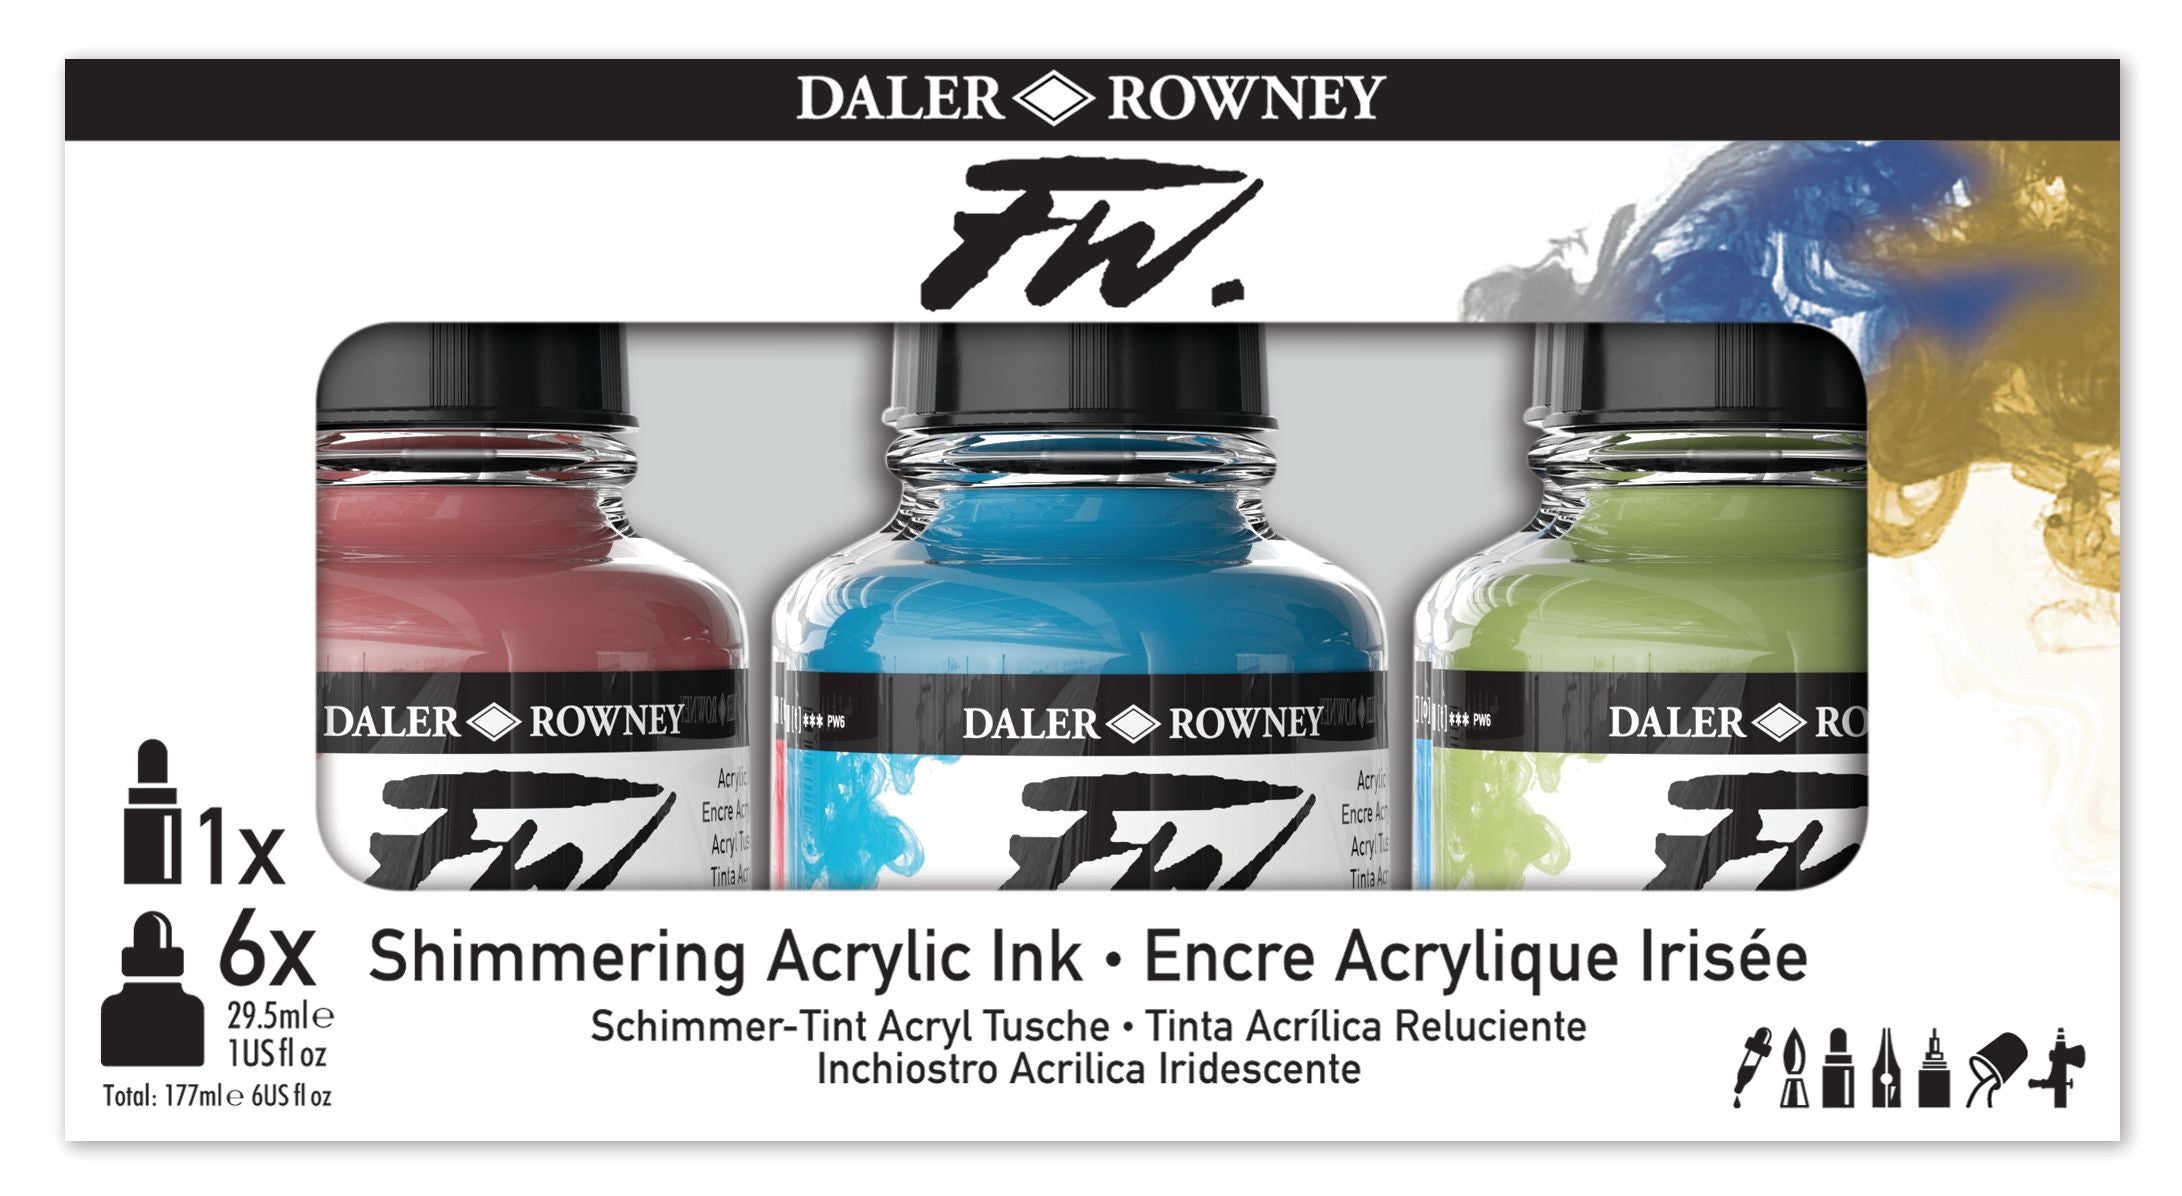 Acrylic Inks  PaperStory - The Great Little Art Shop